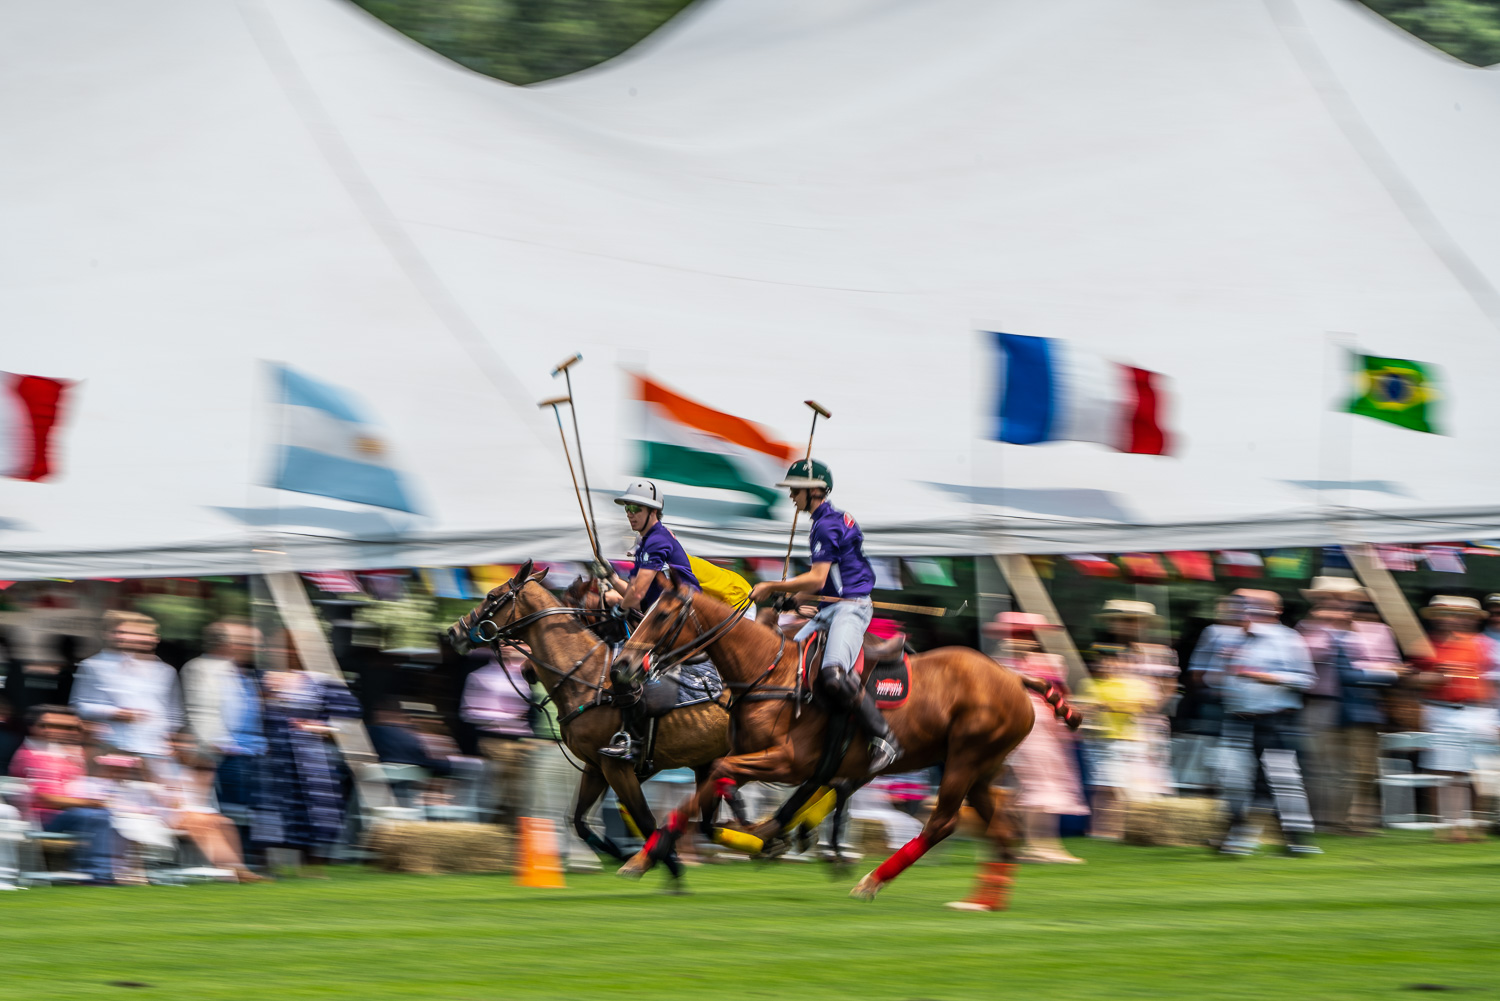 Action in front of the tent at the Mashomack polo club in pine plains, ny. blurs help define the speed of the game..jpg